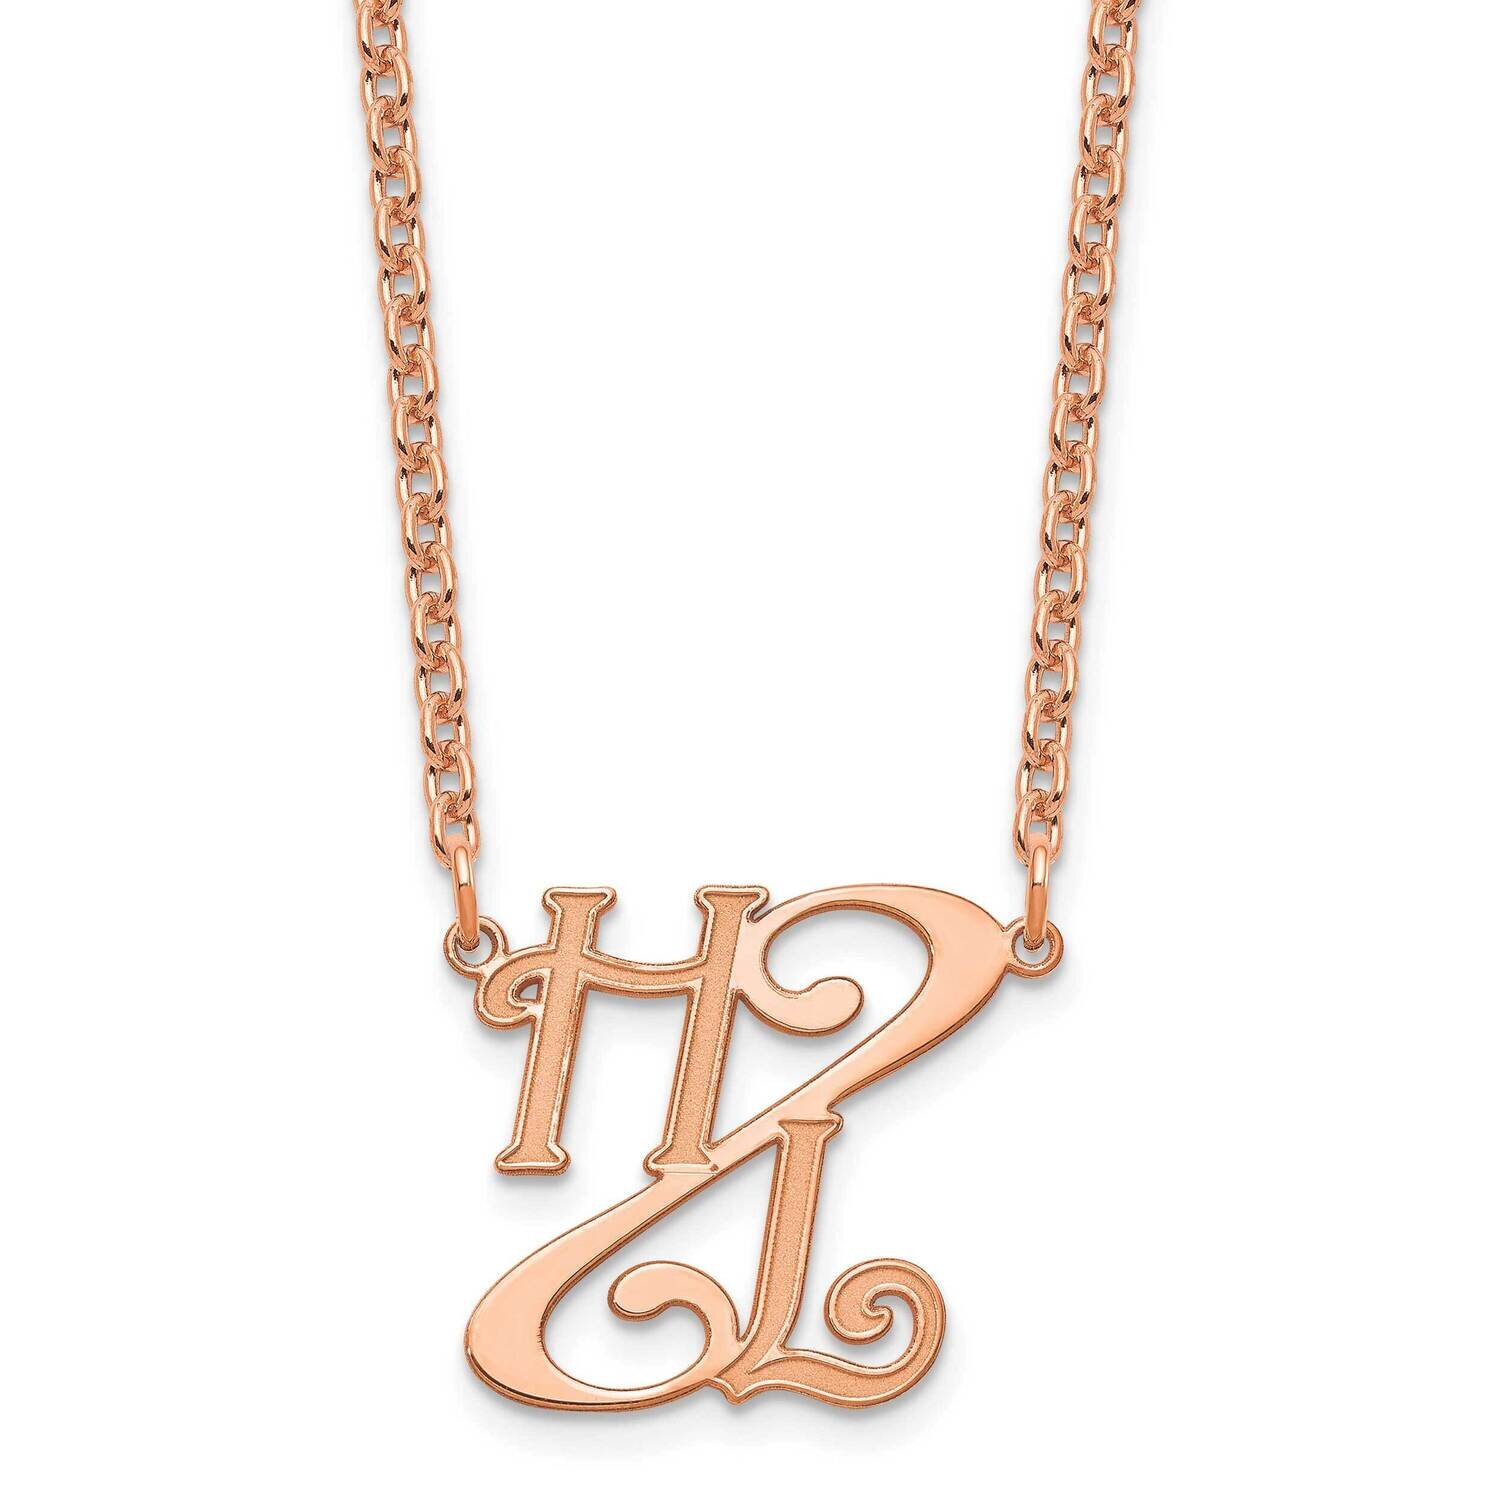 Diagonal Script Initials Necklace Sterling Silver Rose-plated XNA905RP